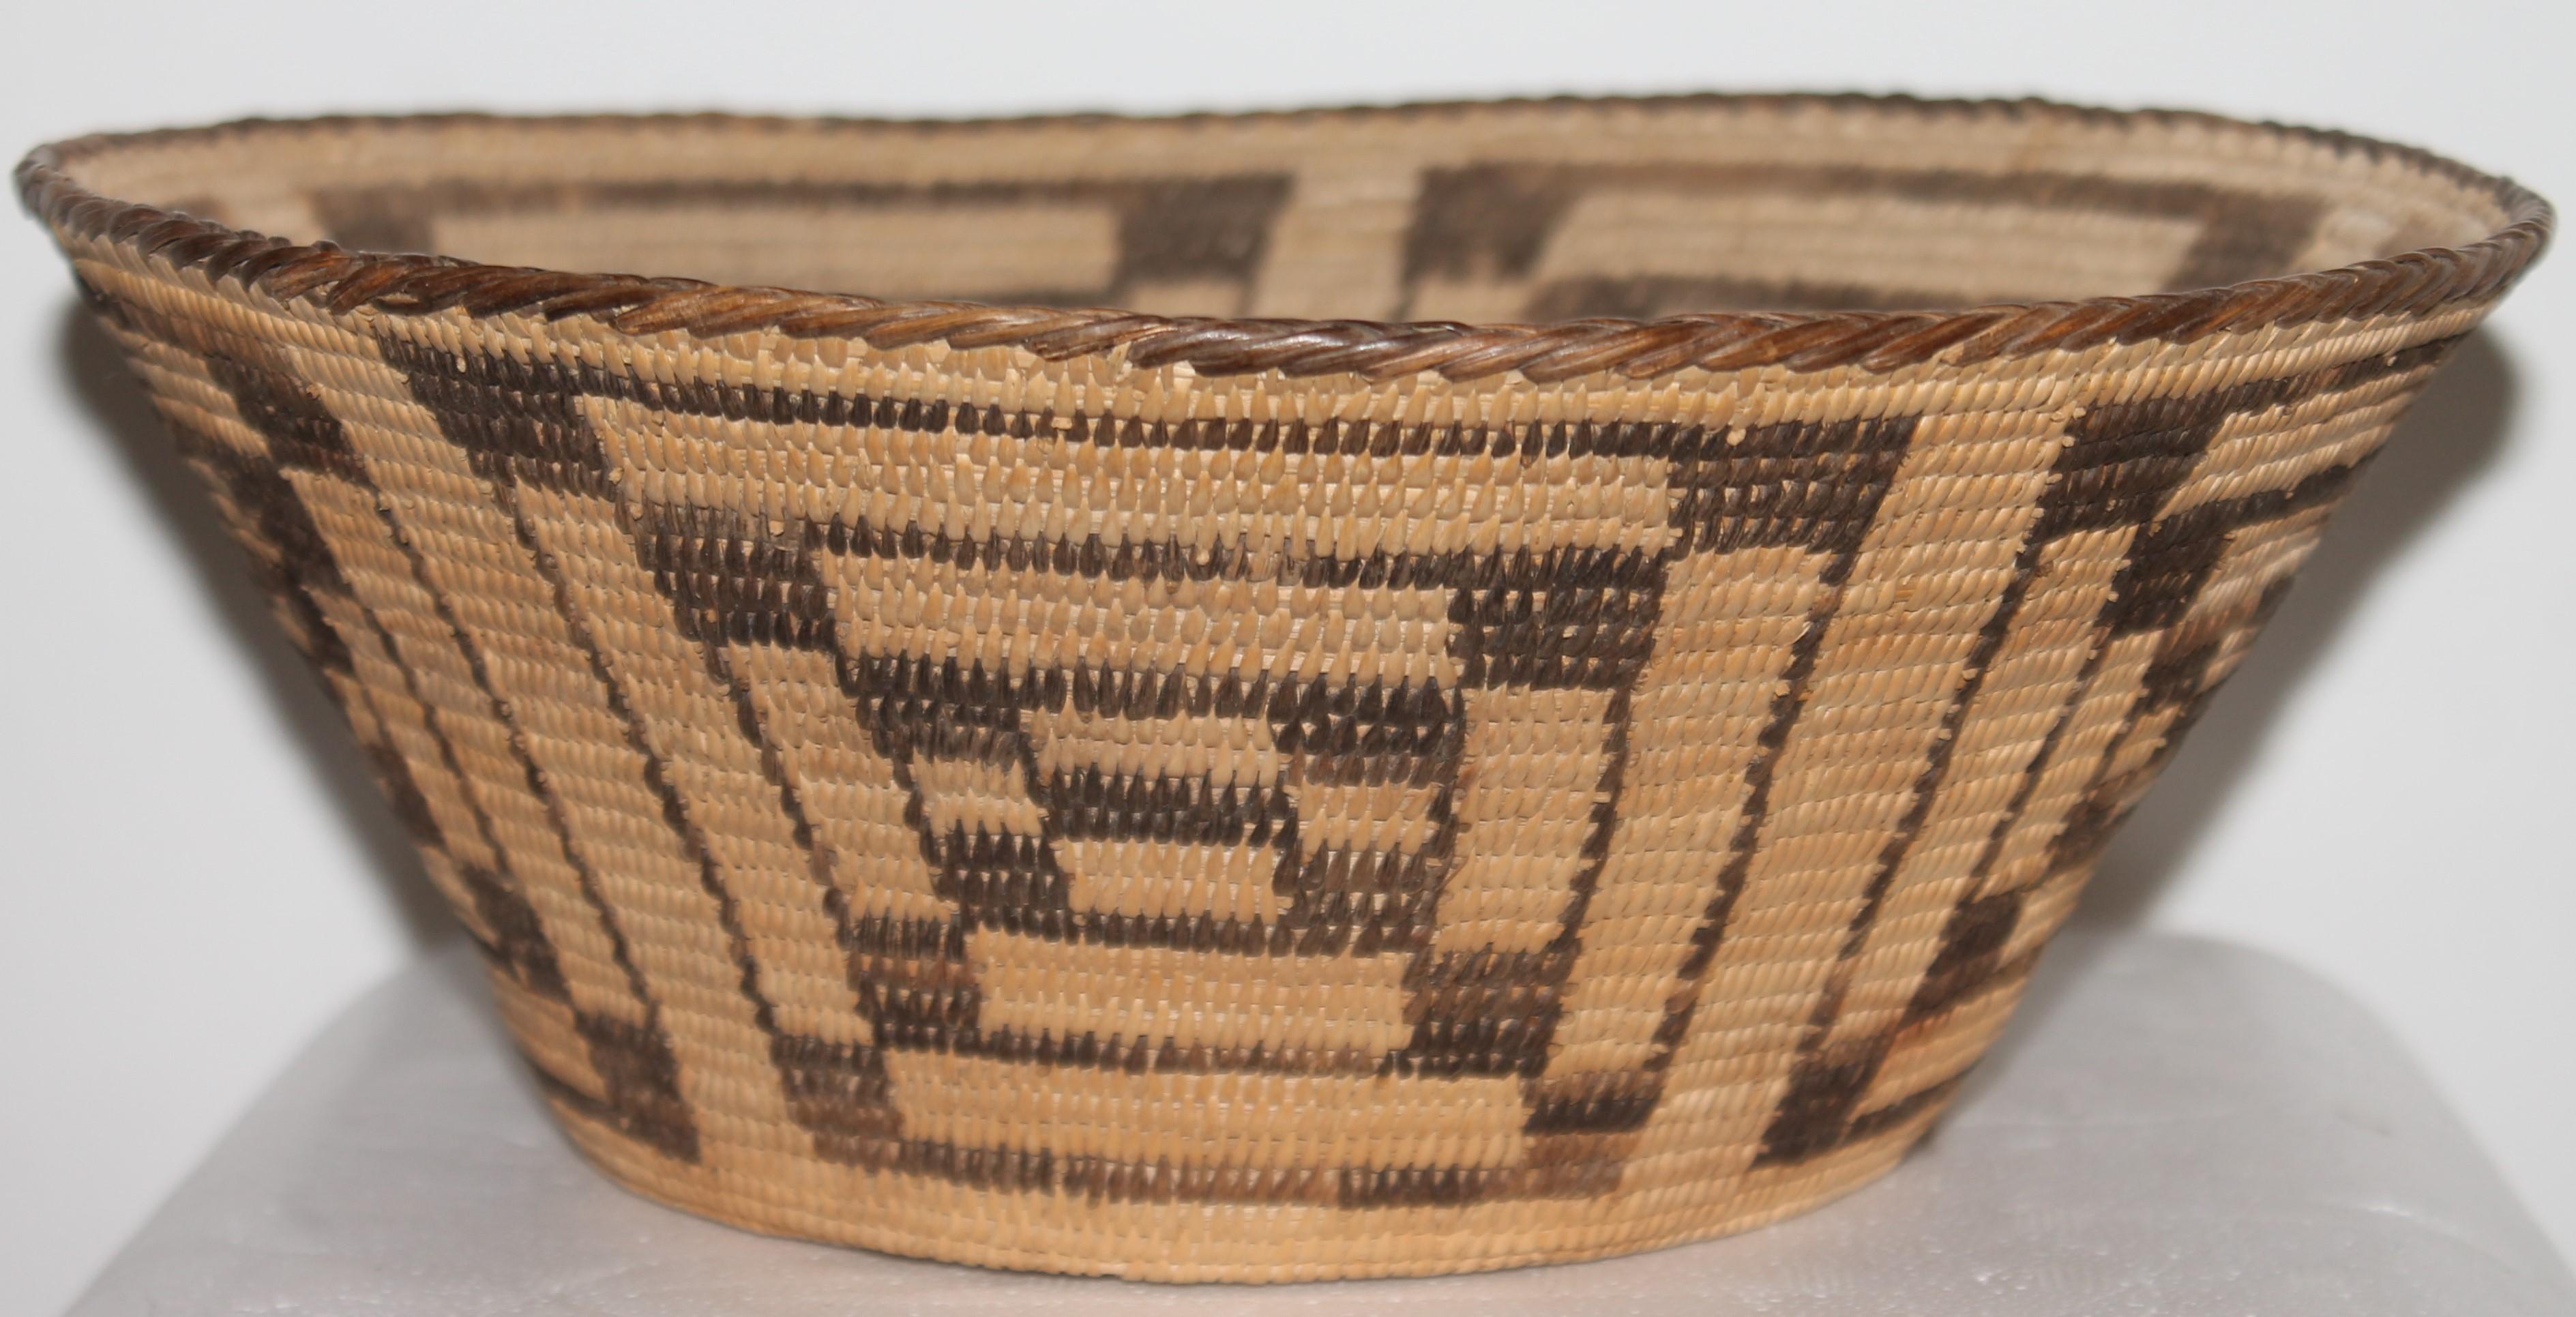 Fantastic early 20thc Pima Indian geometric basket in pristine condition.